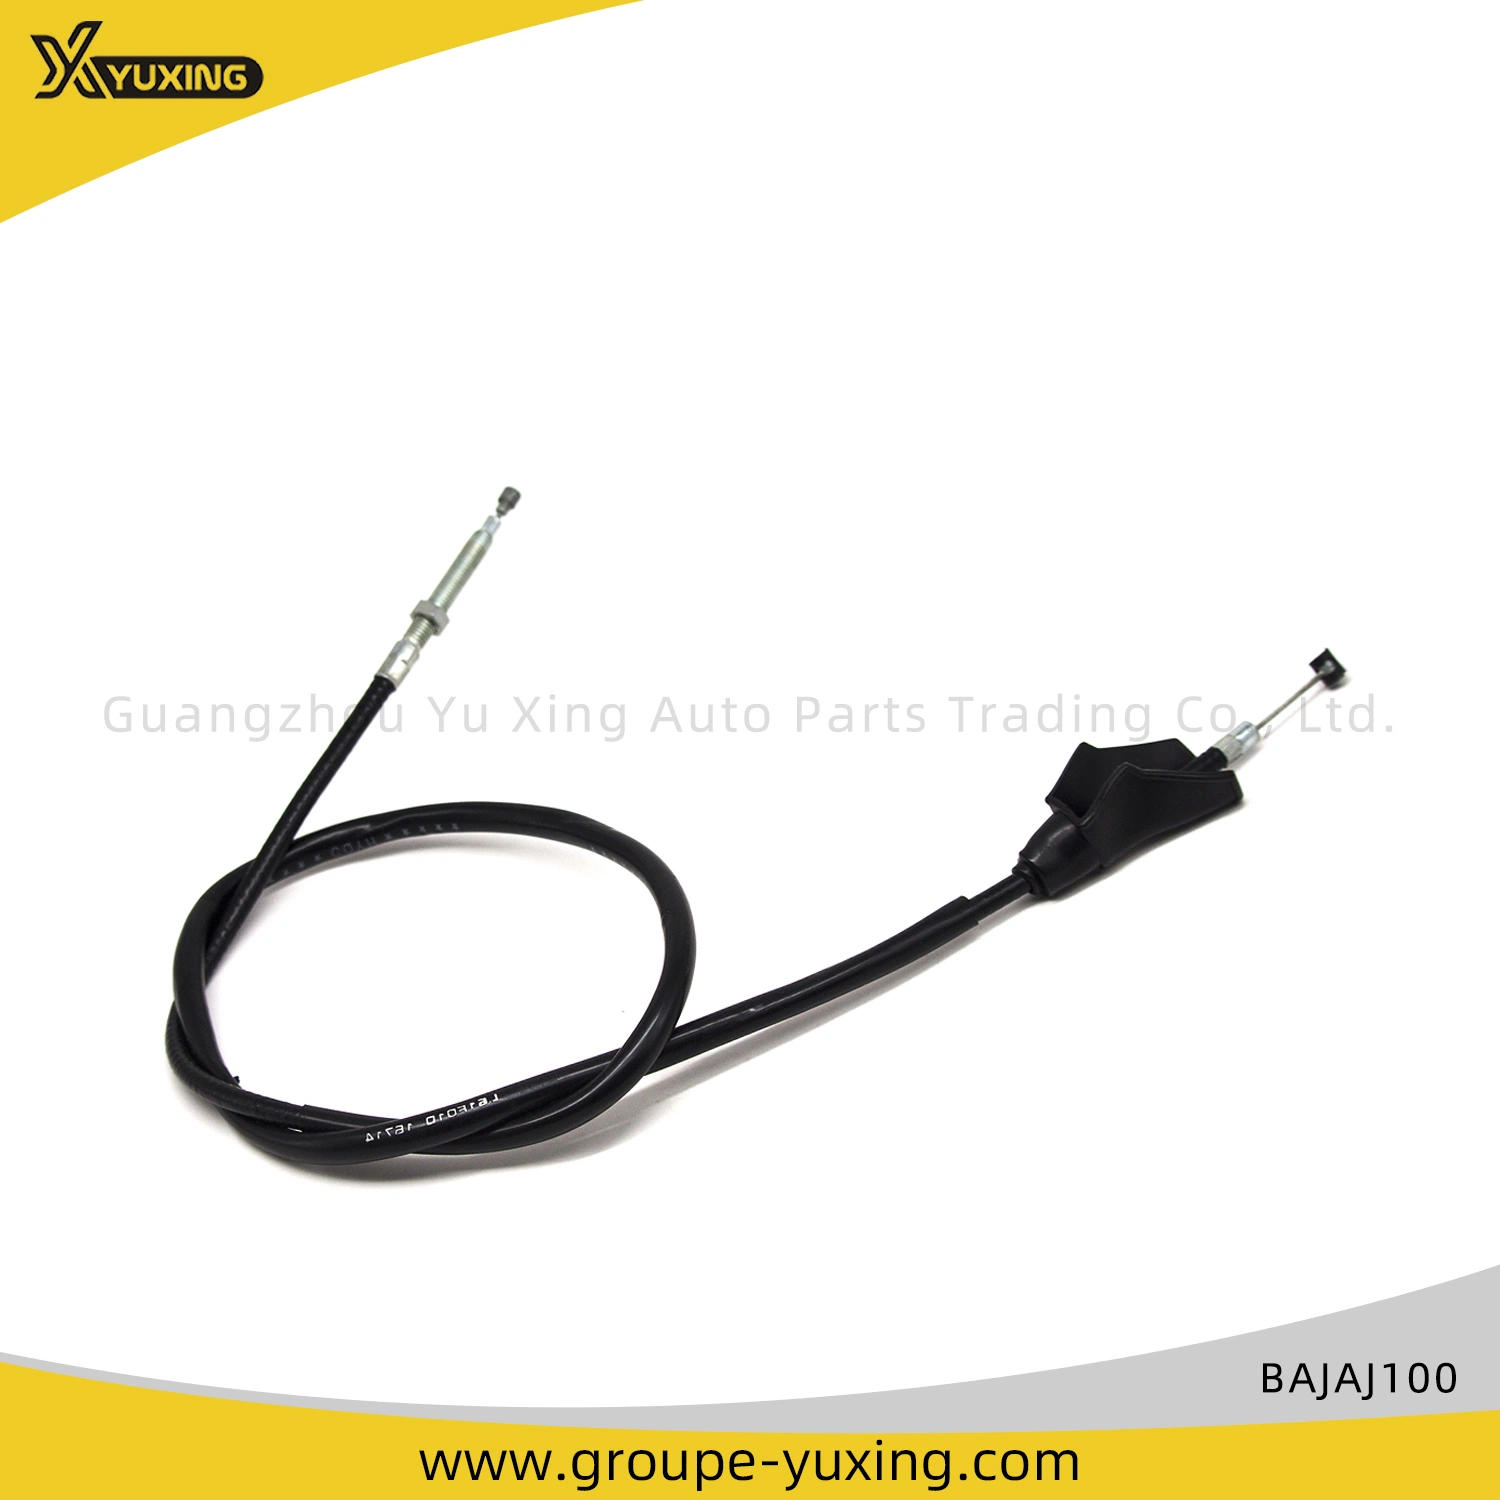 Motorcycle Spare Parts Accessories Motorcycle Clutch Cable